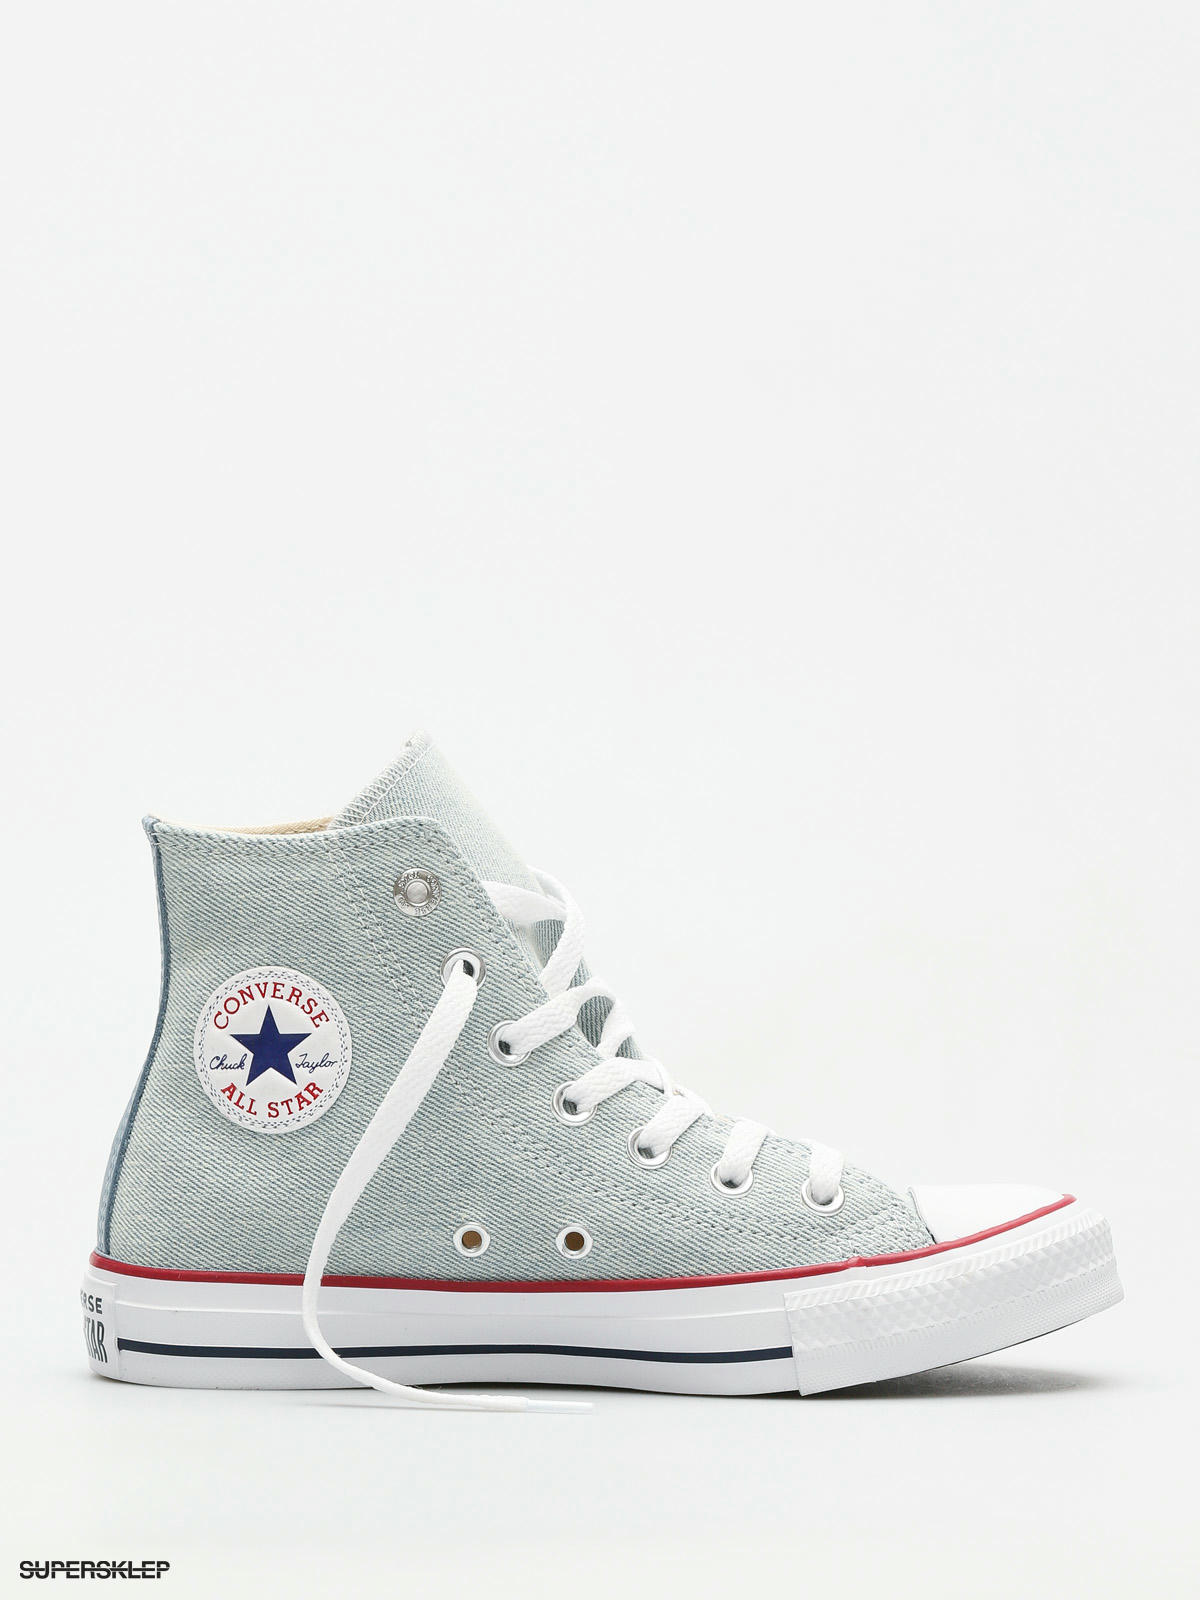 converse all star blue and white